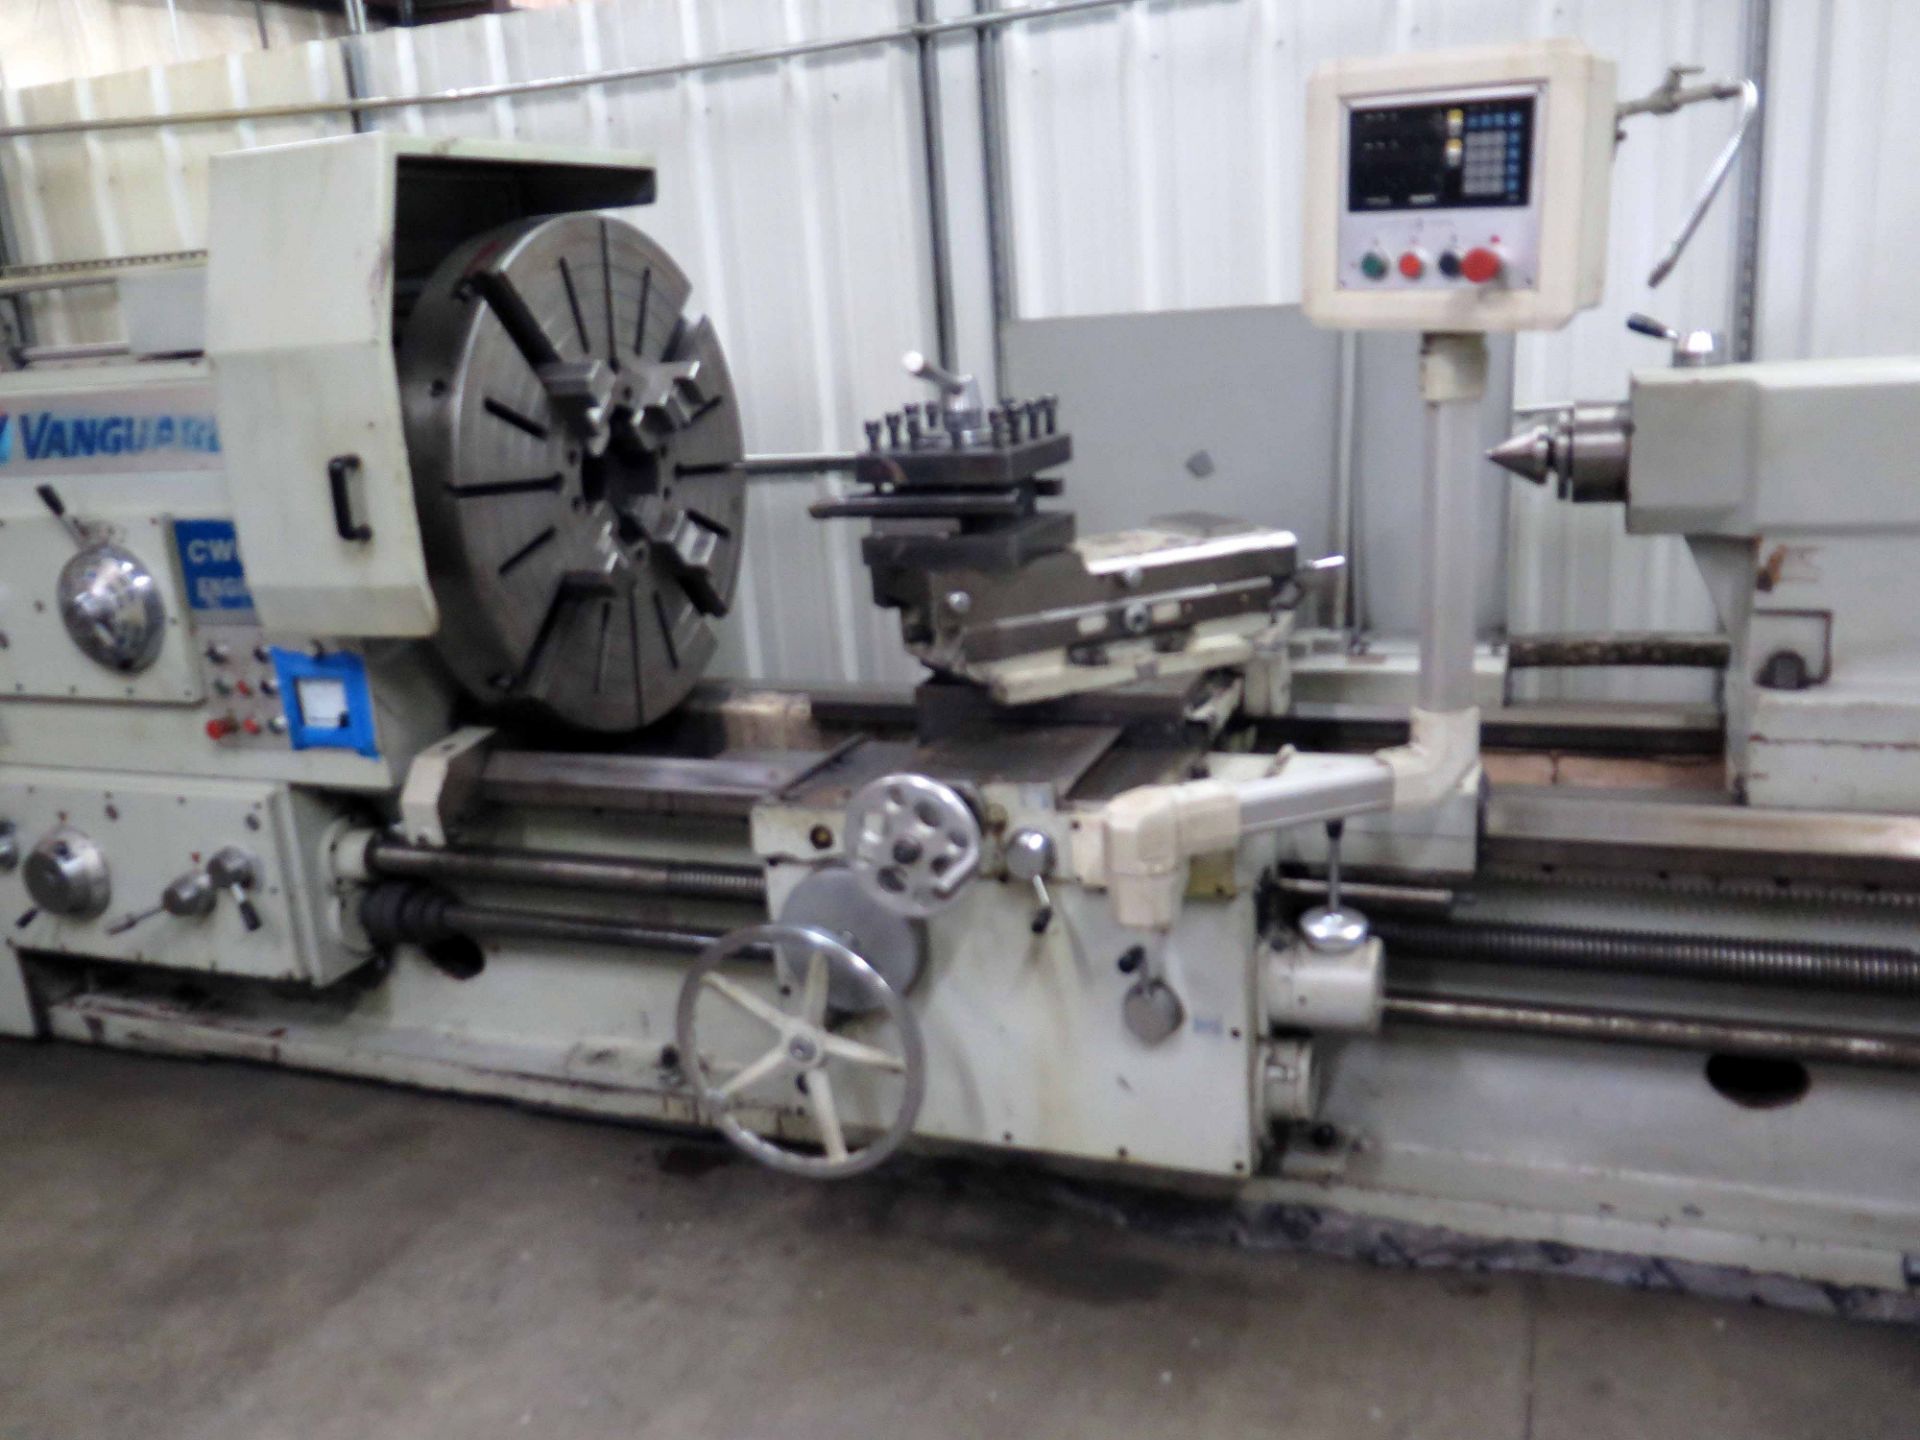 ENGINE LATHE, VANGUARD 40" X 78" MDL. CW61, Sony 2-axis D.R.O., 39-1/2" dia. 4-jaw chuck, spds: 4- - Image 2 of 3